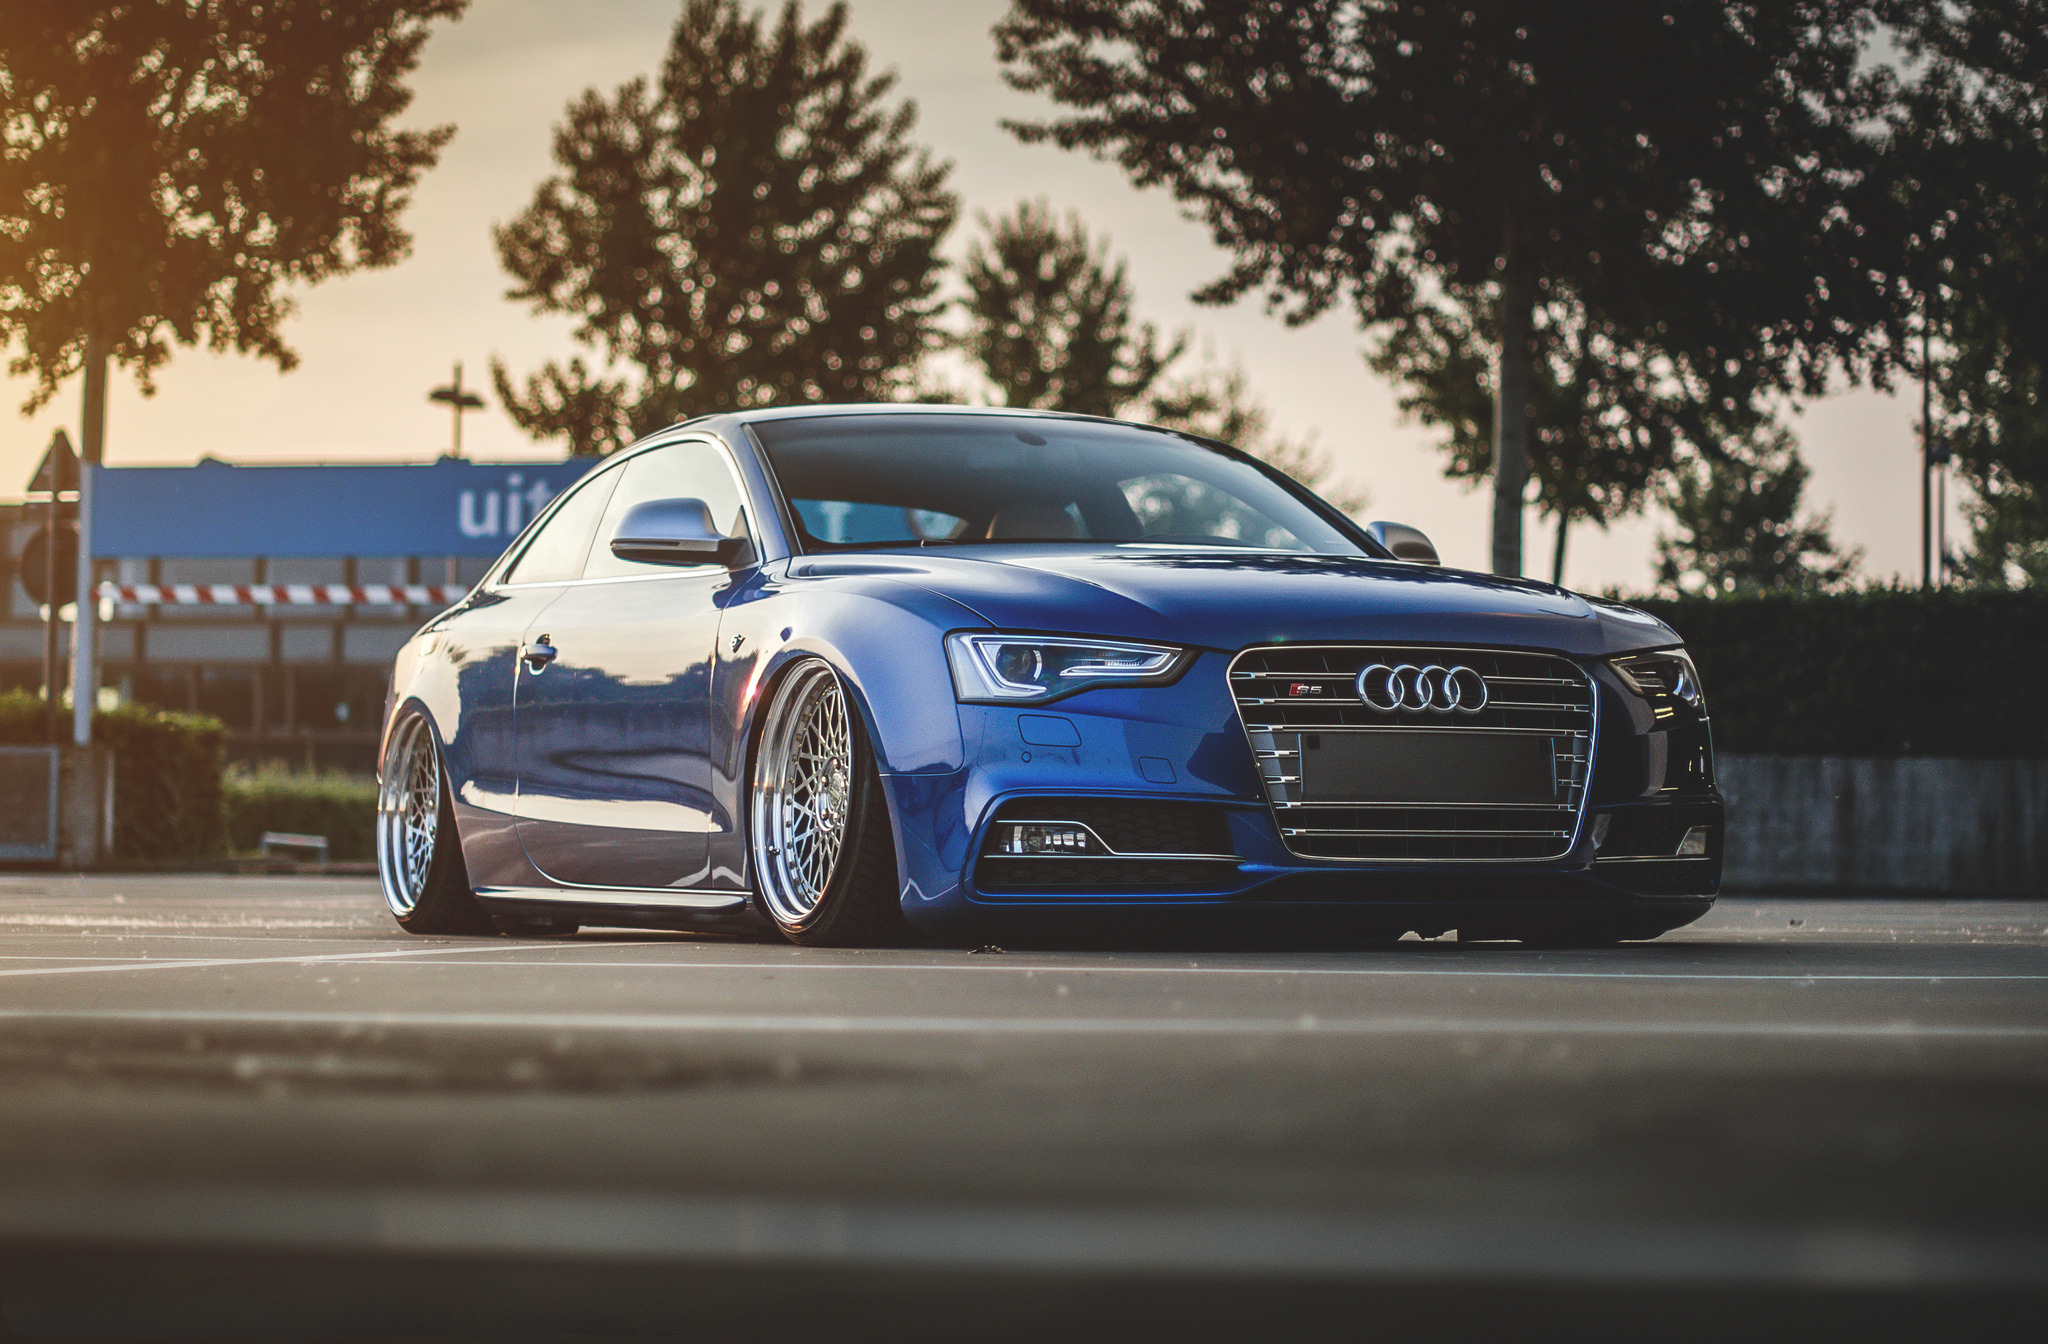 Download wallpaper 2048x1344 audi s5 tuning wheels side view